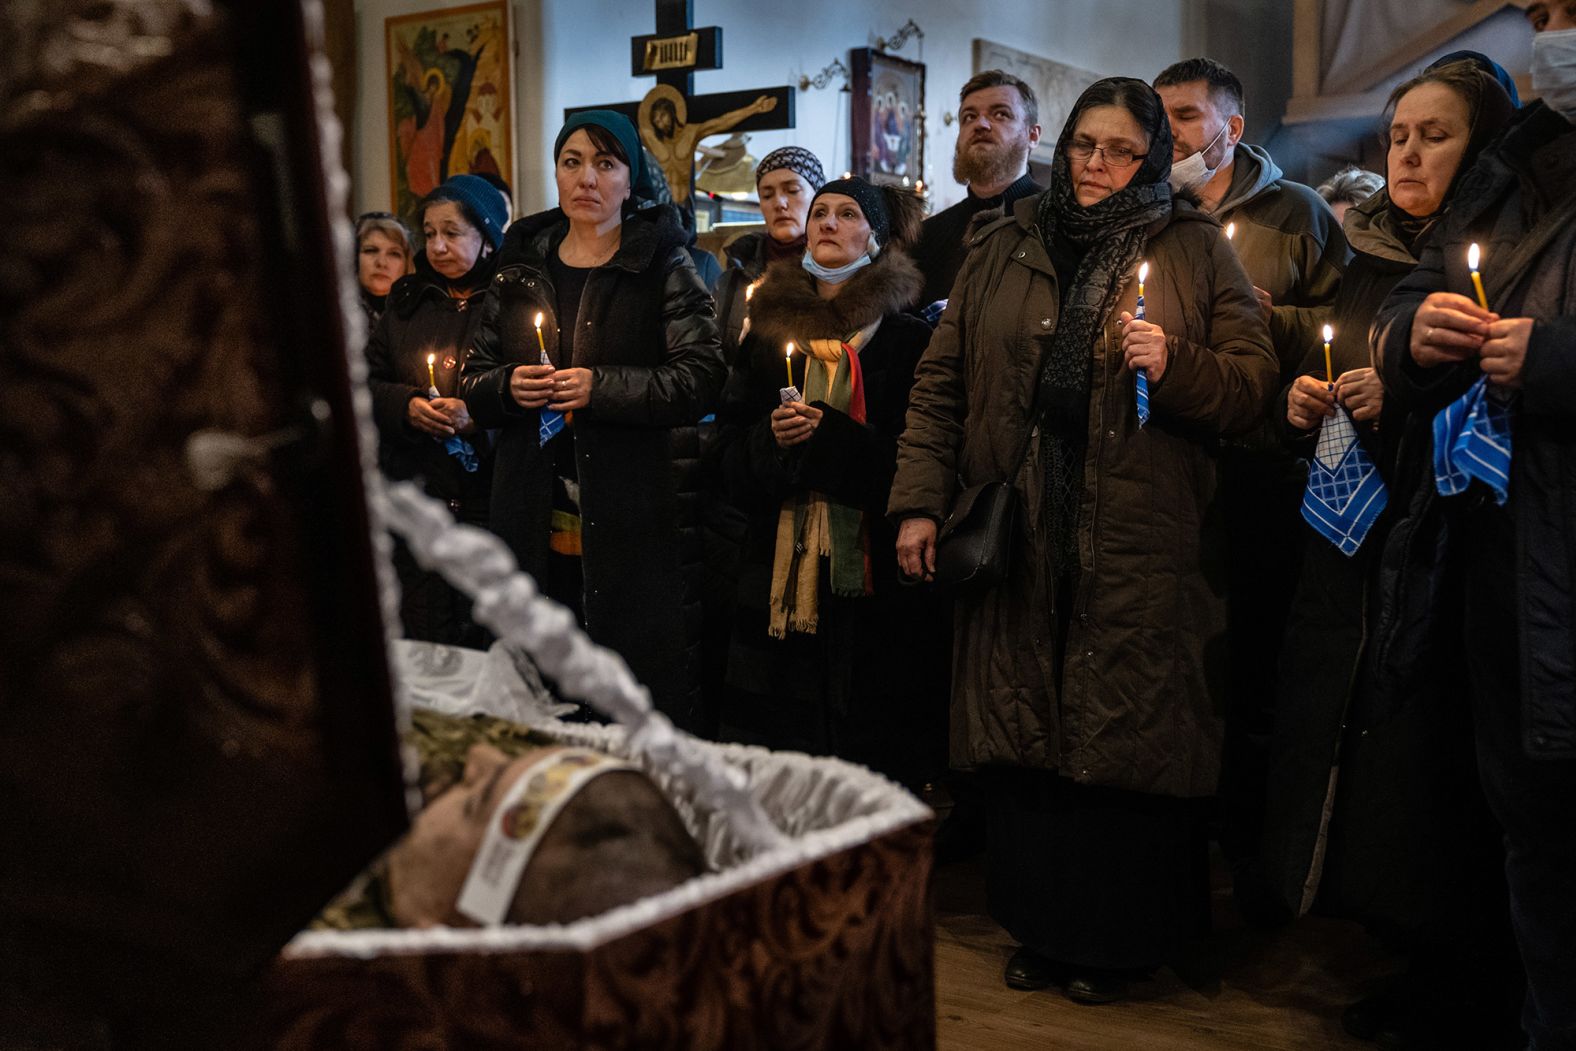 Mourners gather at a church in Kyiv on February 22 for the funeral of Ukrainian Army Capt. Anton Sydorov. The Ukrainian military said he was <a href="index.php?page=&url=https%3A%2F%2Fwww.cnn.com%2Feurope%2Flive-news%2Fukraine-russia-news-02-19-22-intl%2Fh_26fe0a683b93bd317b59b1513a4a8daf" target="_blank">killed by a shrapnel wound</a> on February 19 after several rounds of artillery fire were directed at Ukrainian positions near Myronivske.